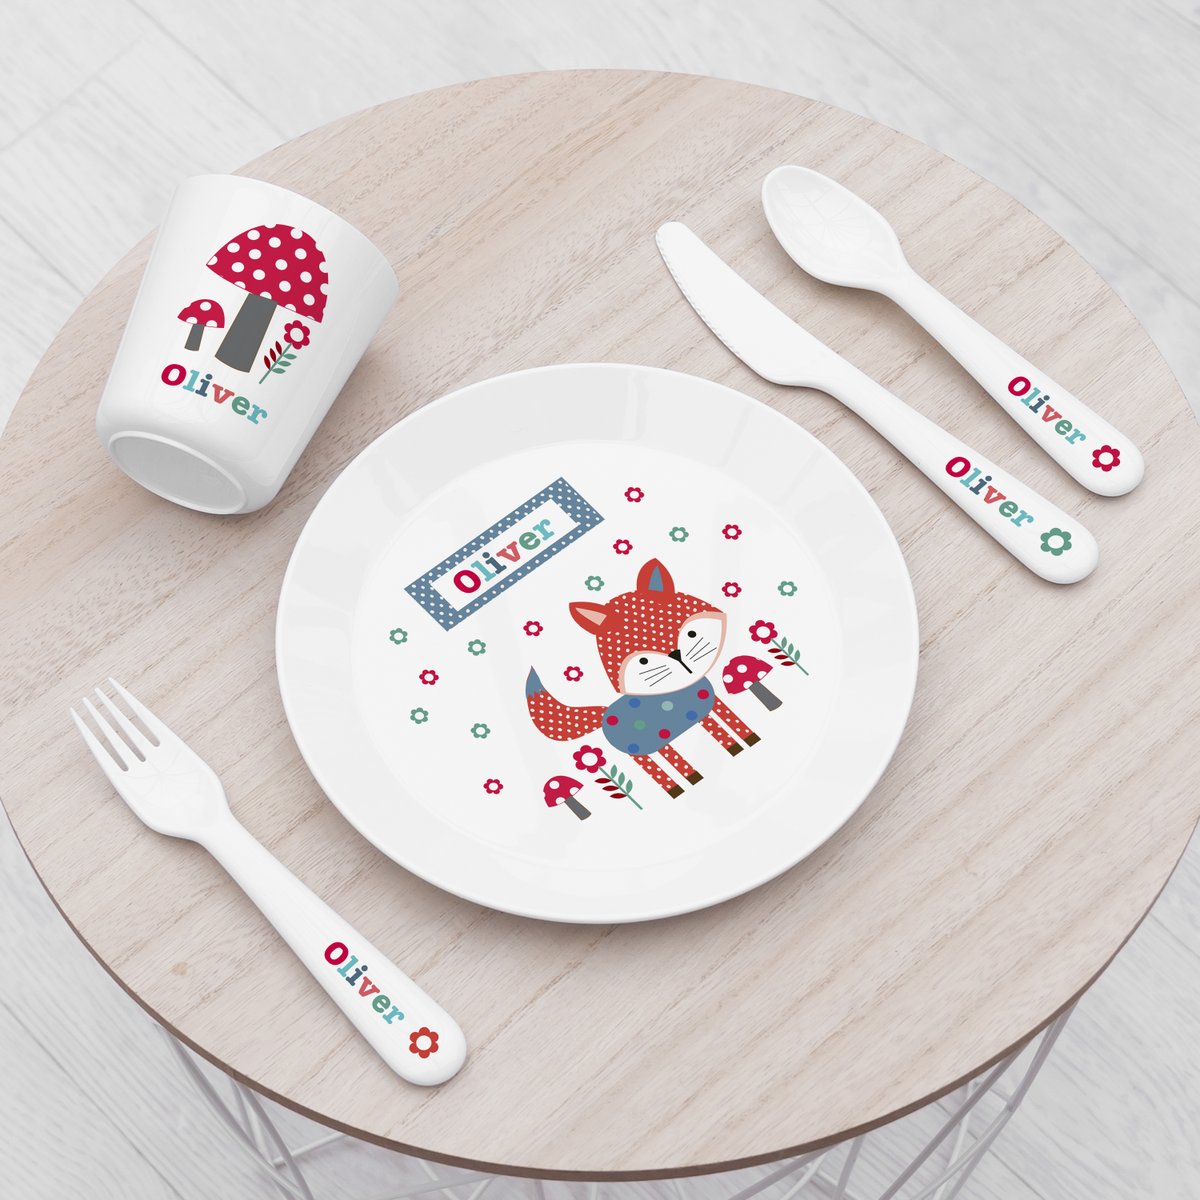 Pretty & shatterproof, this fox design children's dining set includes the cup, plate & cutlery with each piece personalised with the child's name lilybluestore.com/products/perso…

#giftideas #shopindie #shopsmall #childrensgifts #elevenseshour #mhhsbd  #earlybiz